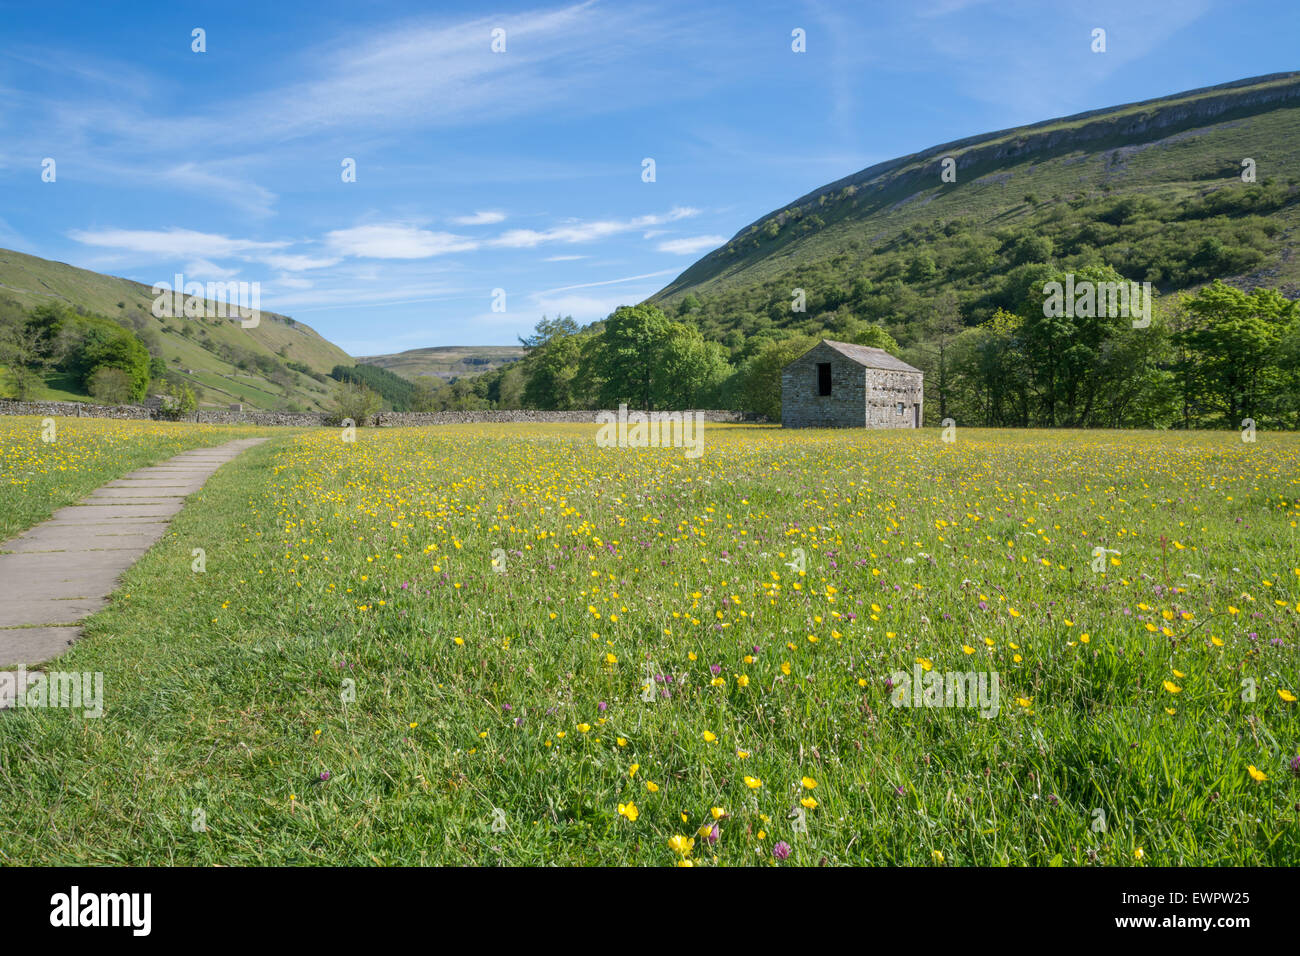 Muker barn and Hay meadows in Swaledale in the Yorkshire Dales Stock Photo